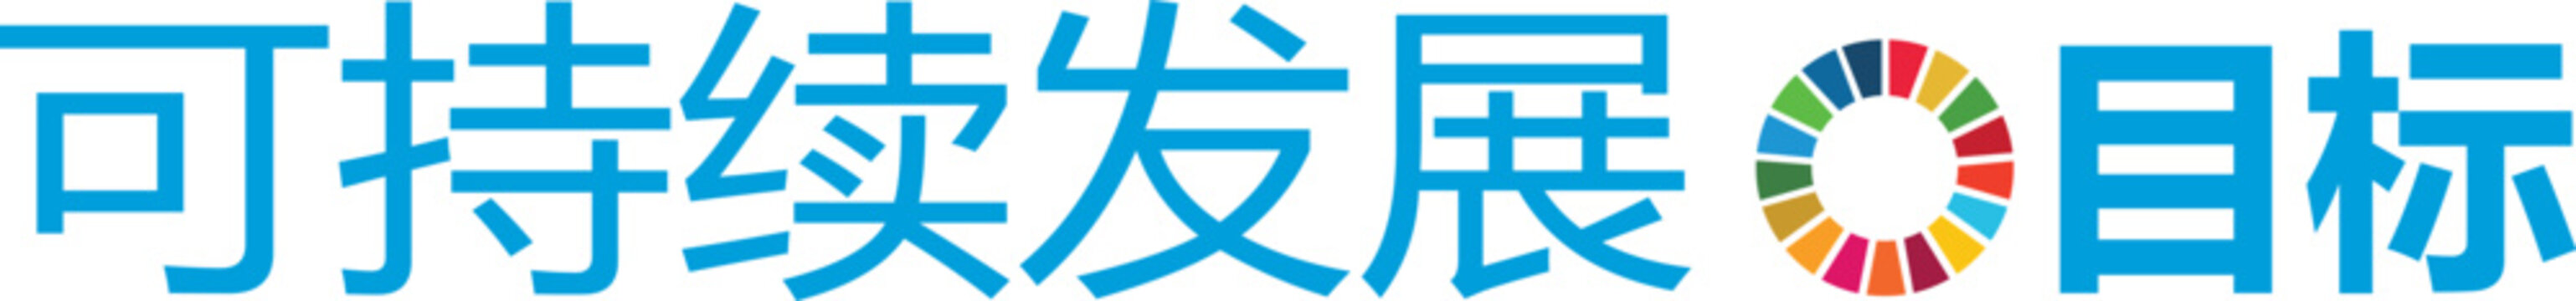 Sustainable Development Goal (SDG) Chinese horizontal logo color version for non- UN entities 